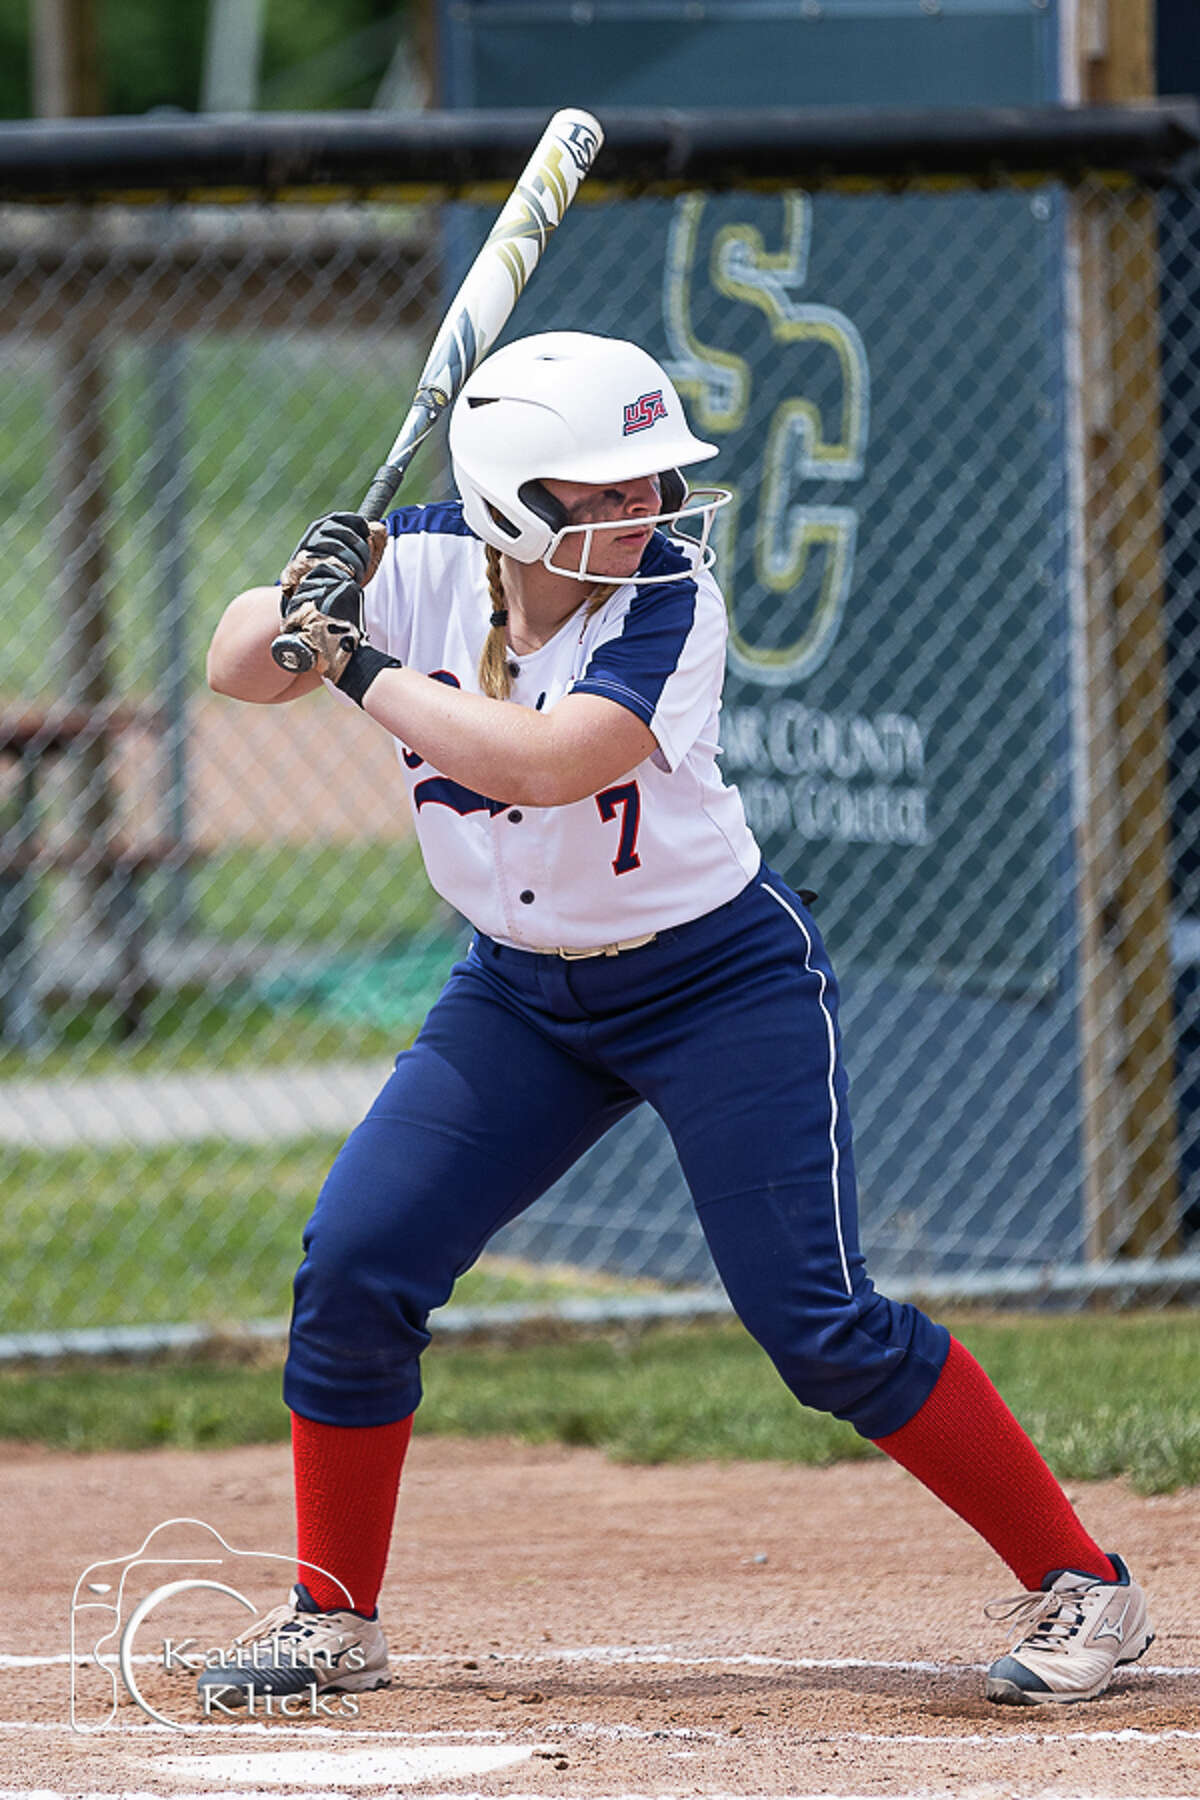 The Unionville-Sebewaing Area varsity softball team advanced to the state semifinals on Tuesday evening with 9-1 victory in the state quarterfinals over Allen Park Cabrini at Marysville City Park.